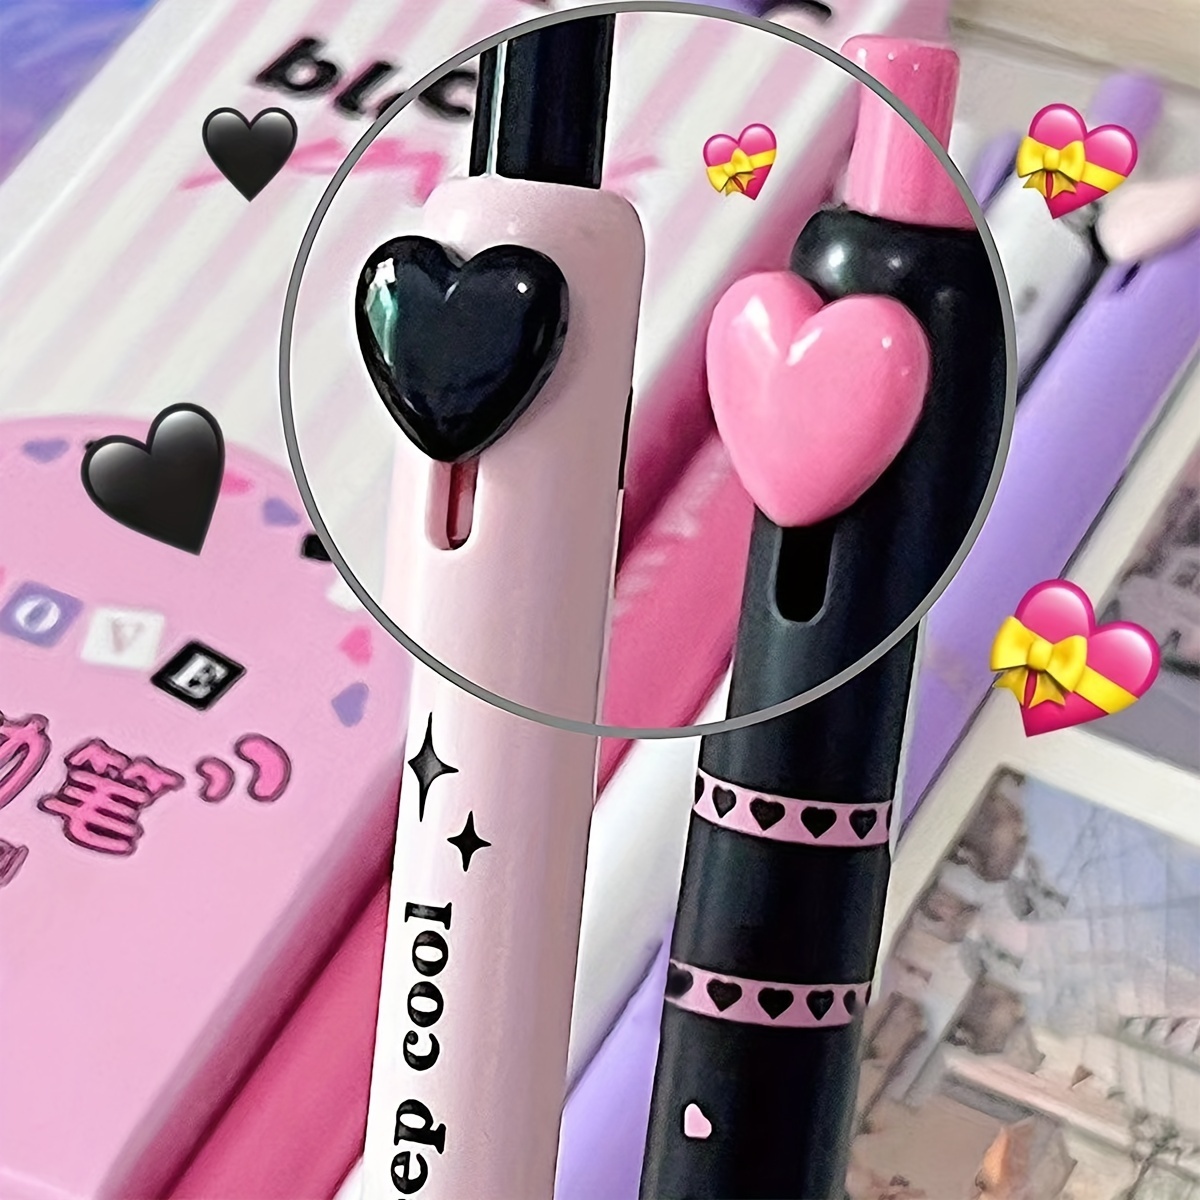 Cute Pens Kawaii 0.5mm Black Ink Gel Pens Fine Point Smooth Writing Ballpoint for Office School Supplies Nice Fun Gifts for Kids Girls Women Pens for